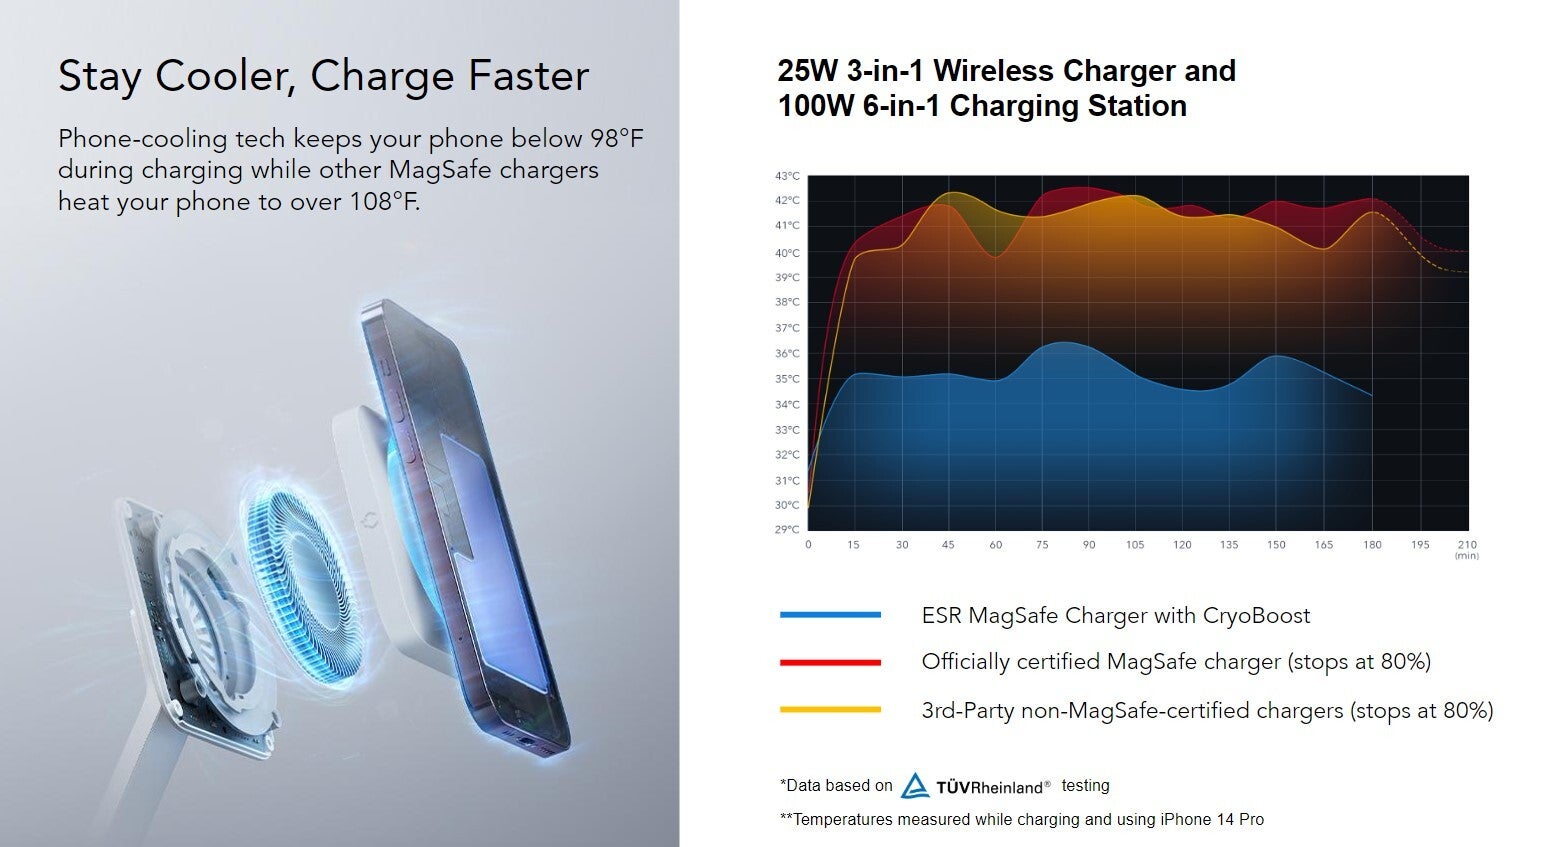 Fastest MagSafe Charging: ESR's New Lineup Brings Superfast Charging for  iPhones